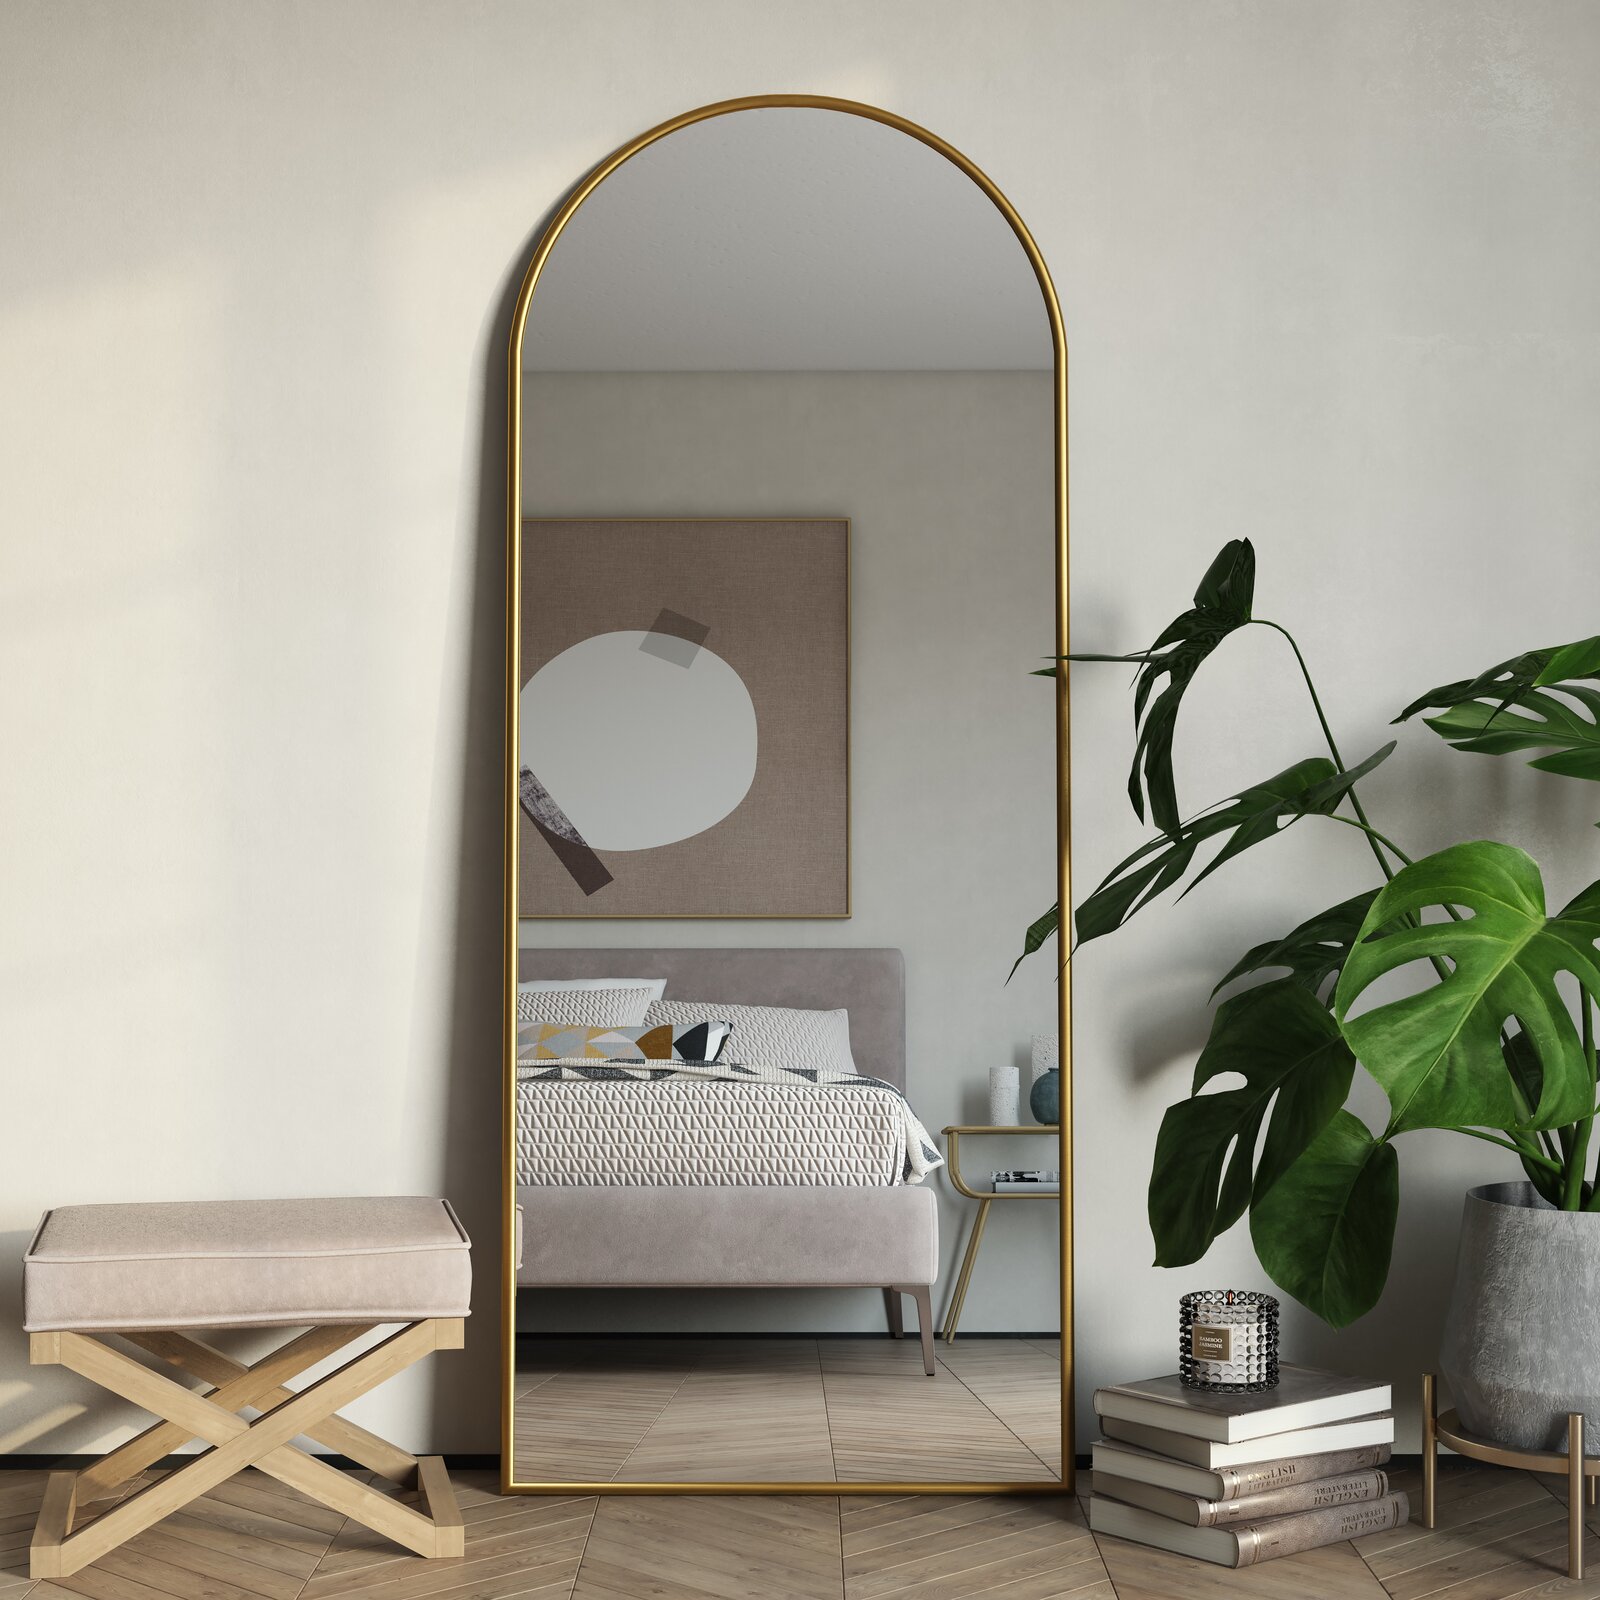 How To Use Mirrors Effectively In Interior Design: A Practical Guide